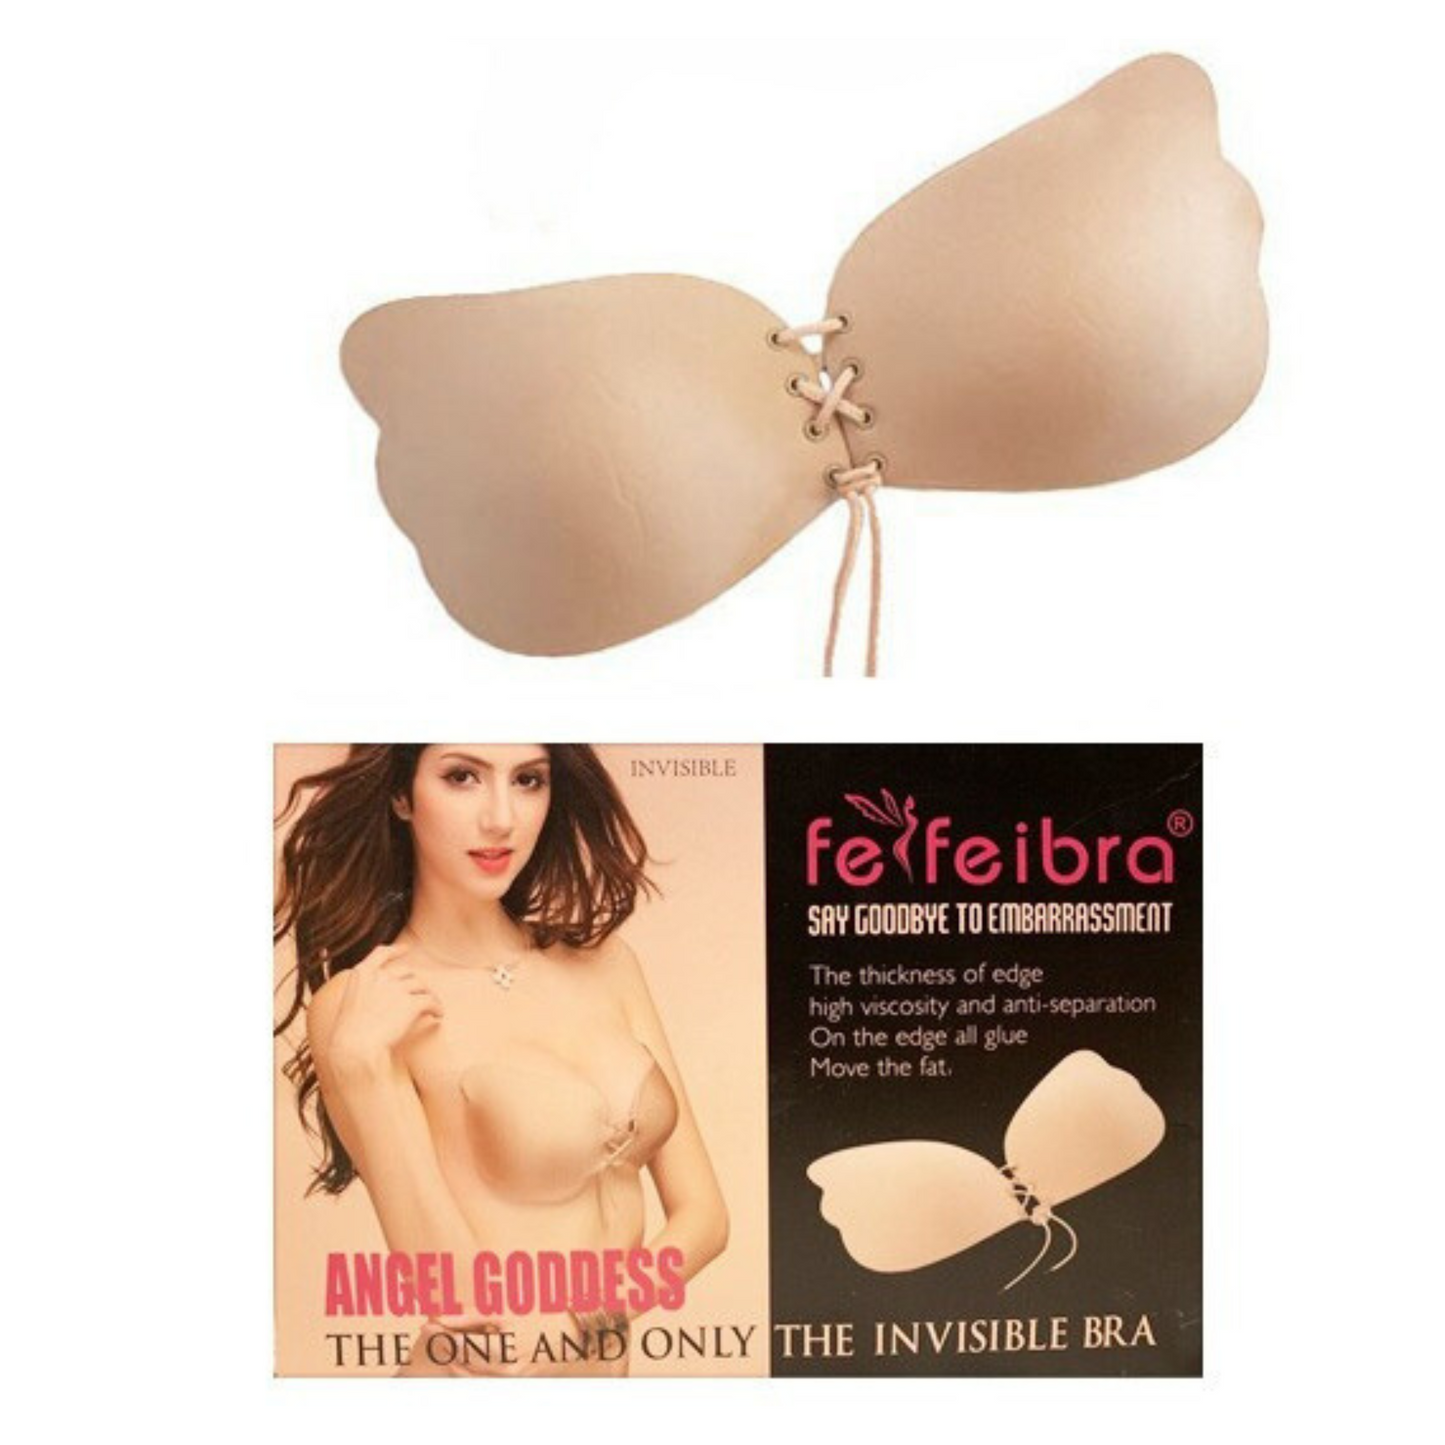 This innovative Breast Lift Adhesive Bra is a modern solution to instantly lift and shape your figure. Push up, adhesive, and drawstring features combine to provide a natural and secure fit without the need for straps or back closures. Enjoy lasting support with uncompromising comfort.